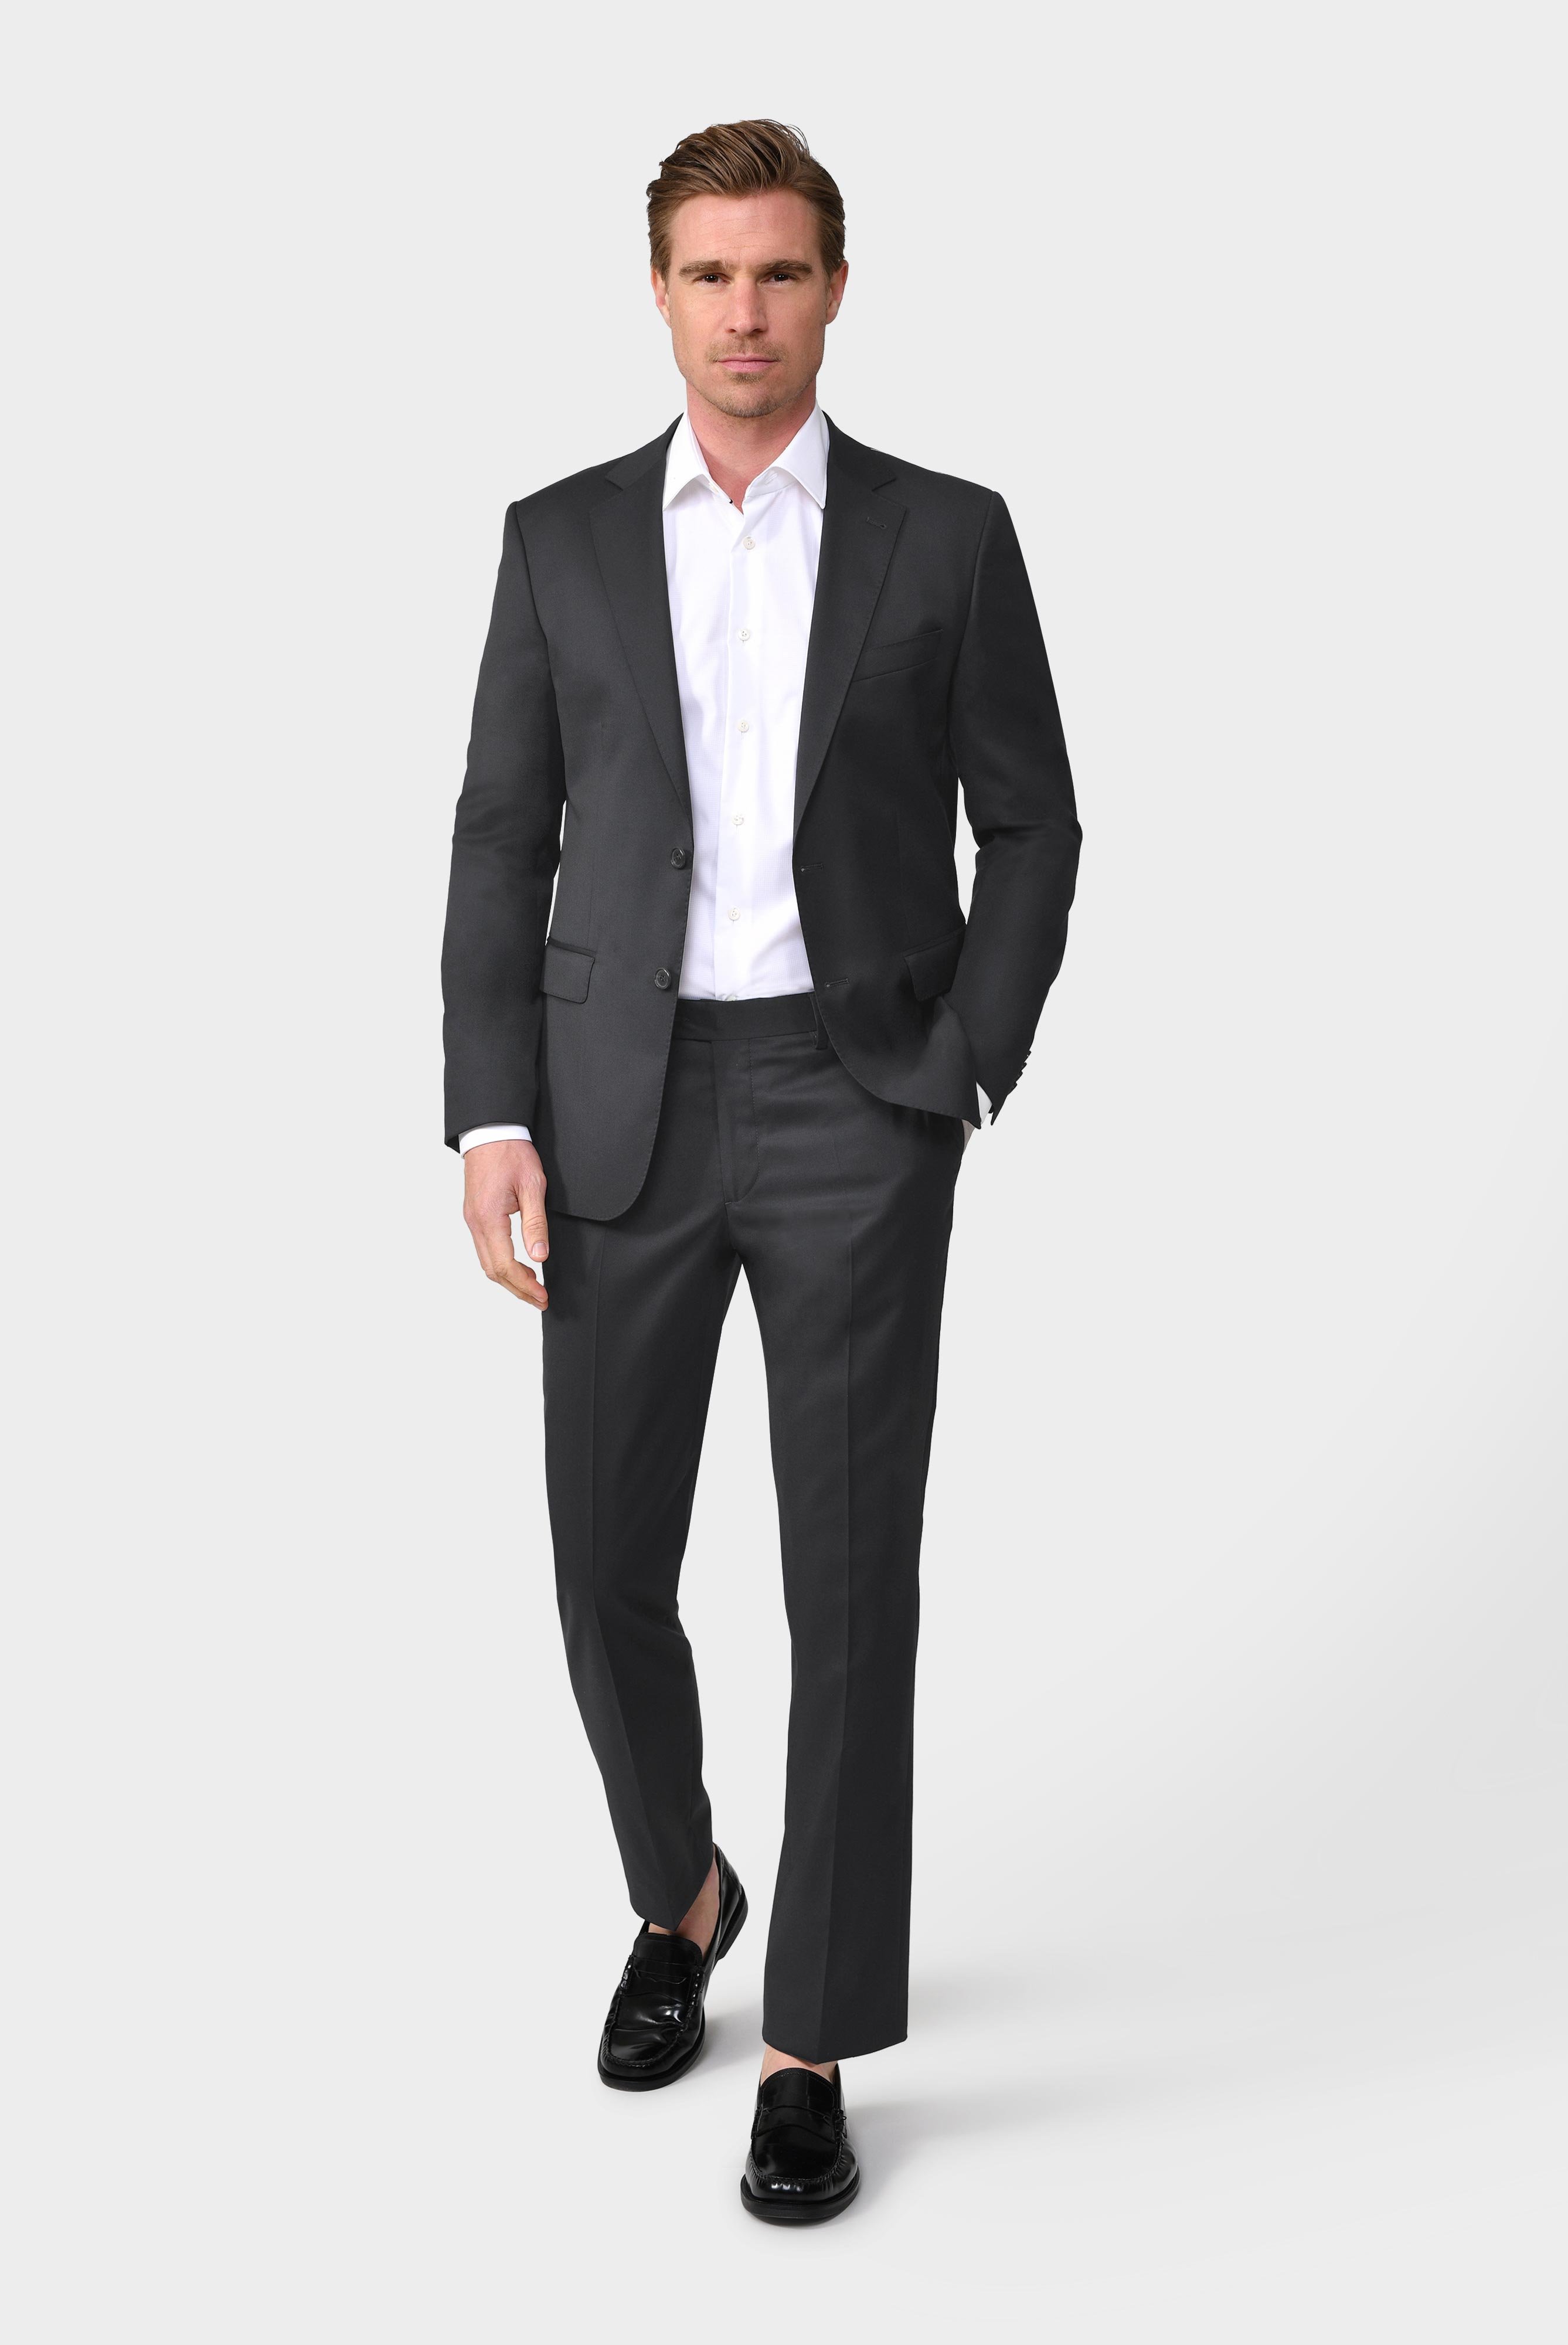 Jeans & Trousers+Men''s pants made of merino wool+80.7804.16.H01000.090.44